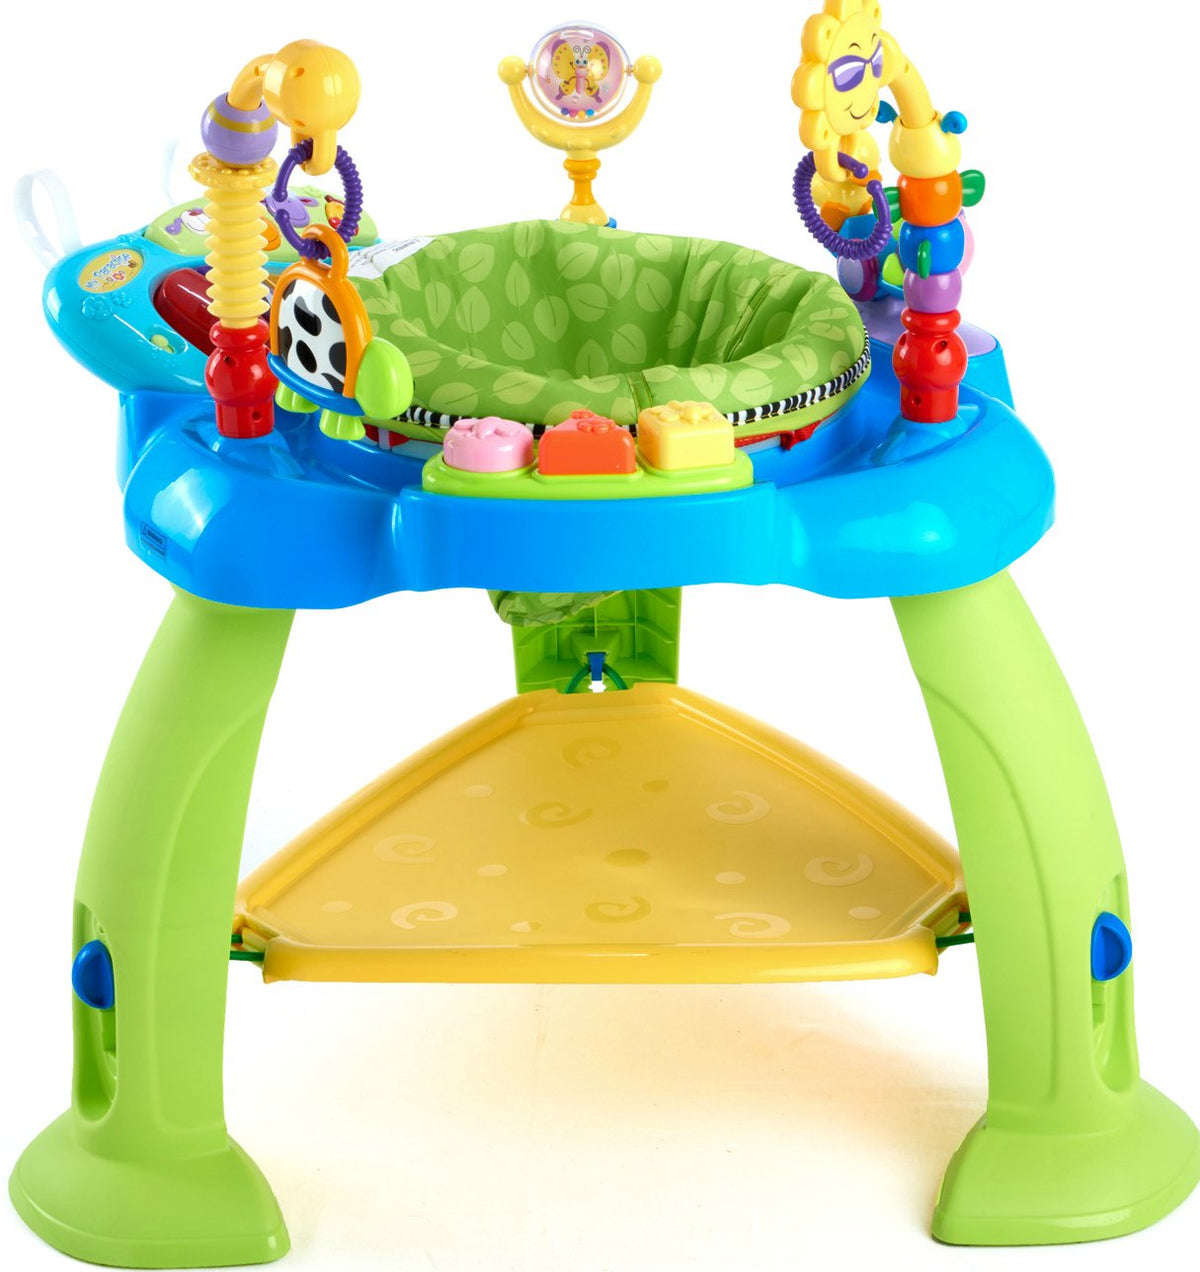 Little Angel - Jump 'N' Turn Activity Chair For Kids, Multifunctional Baby Jumping Chair